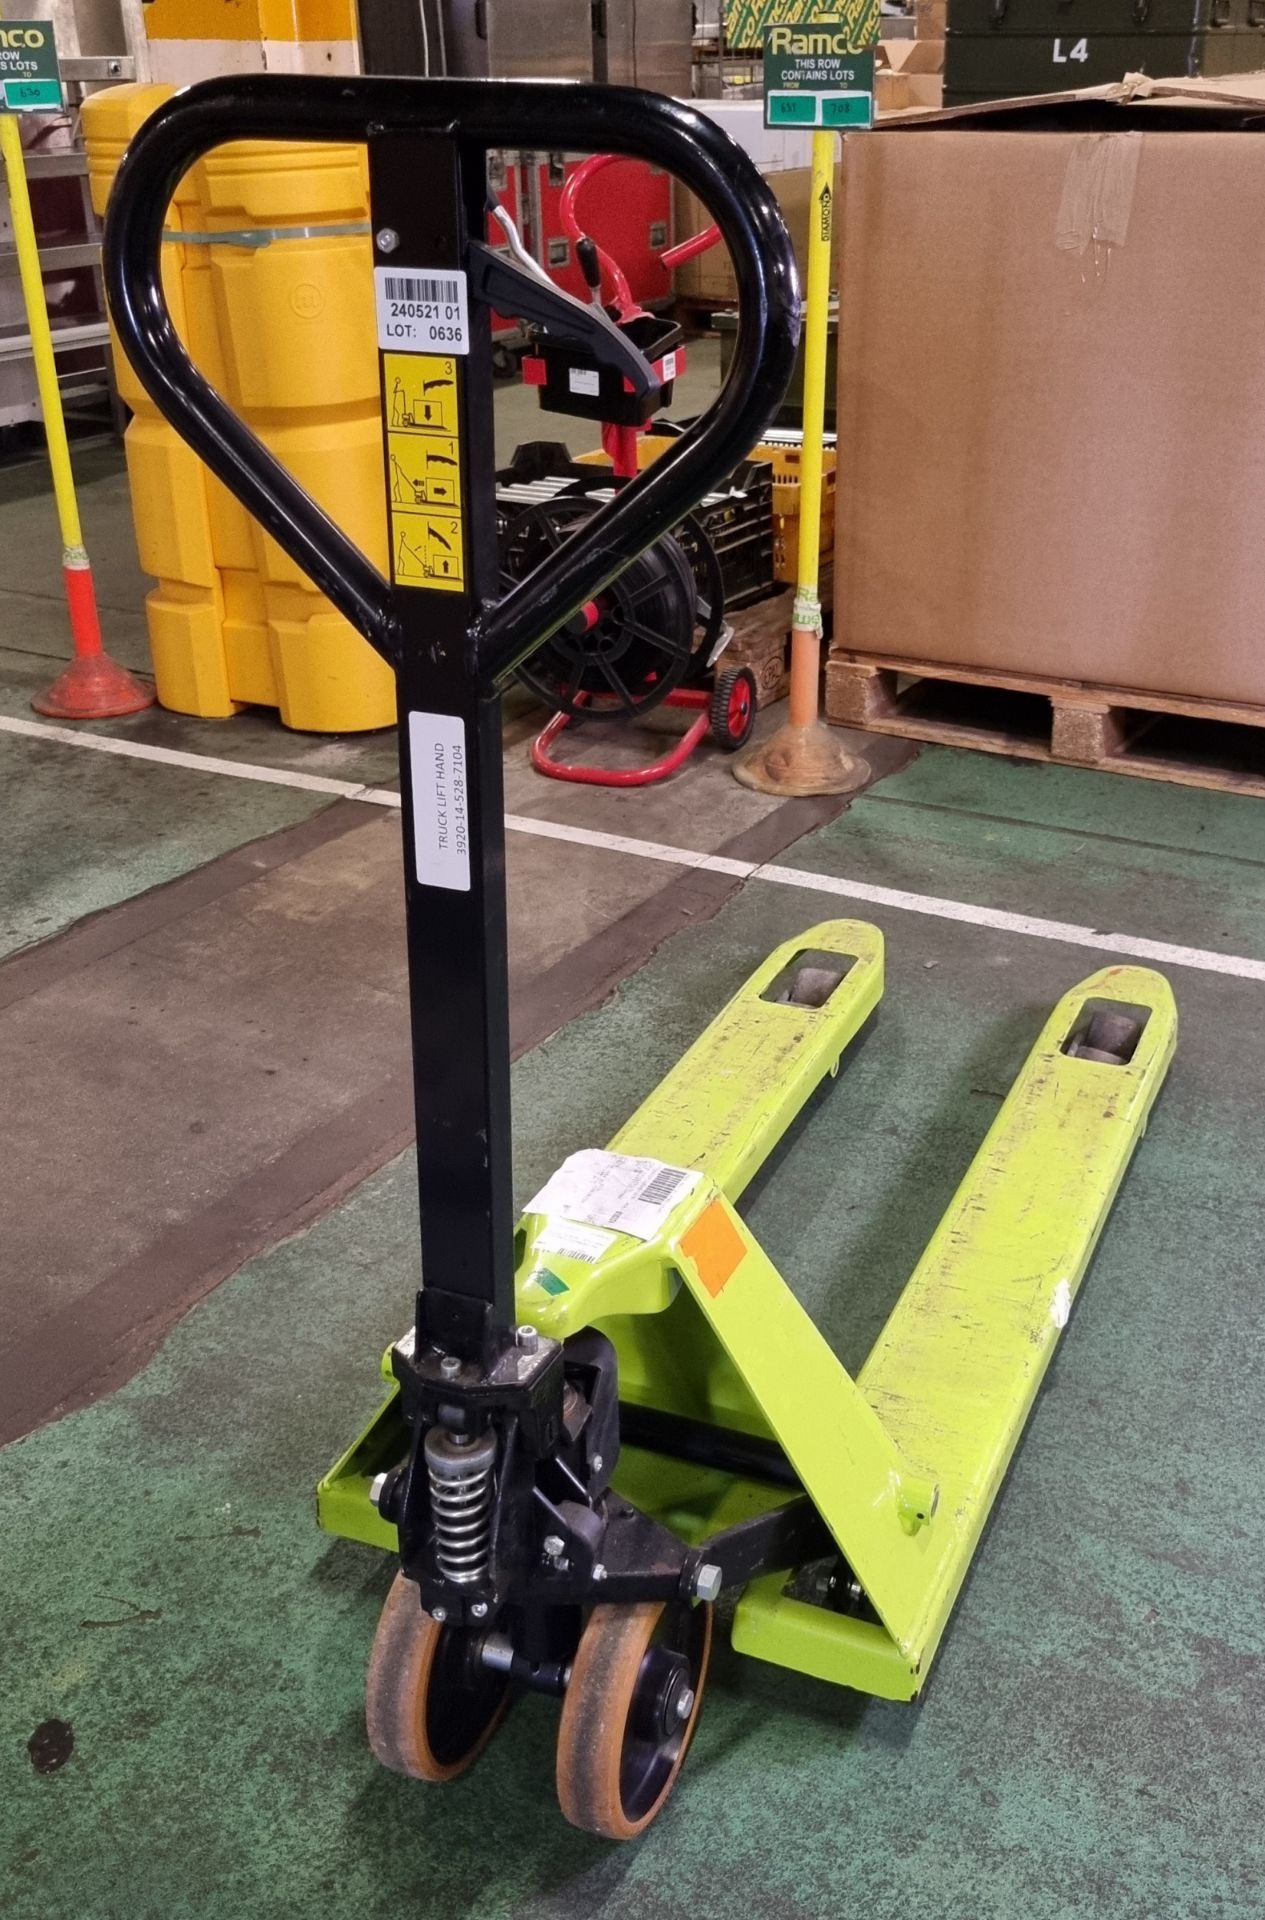 Lifter GS/BASIC 22S4 hand pallet truck - capacity: 2200kg - Image 4 of 4